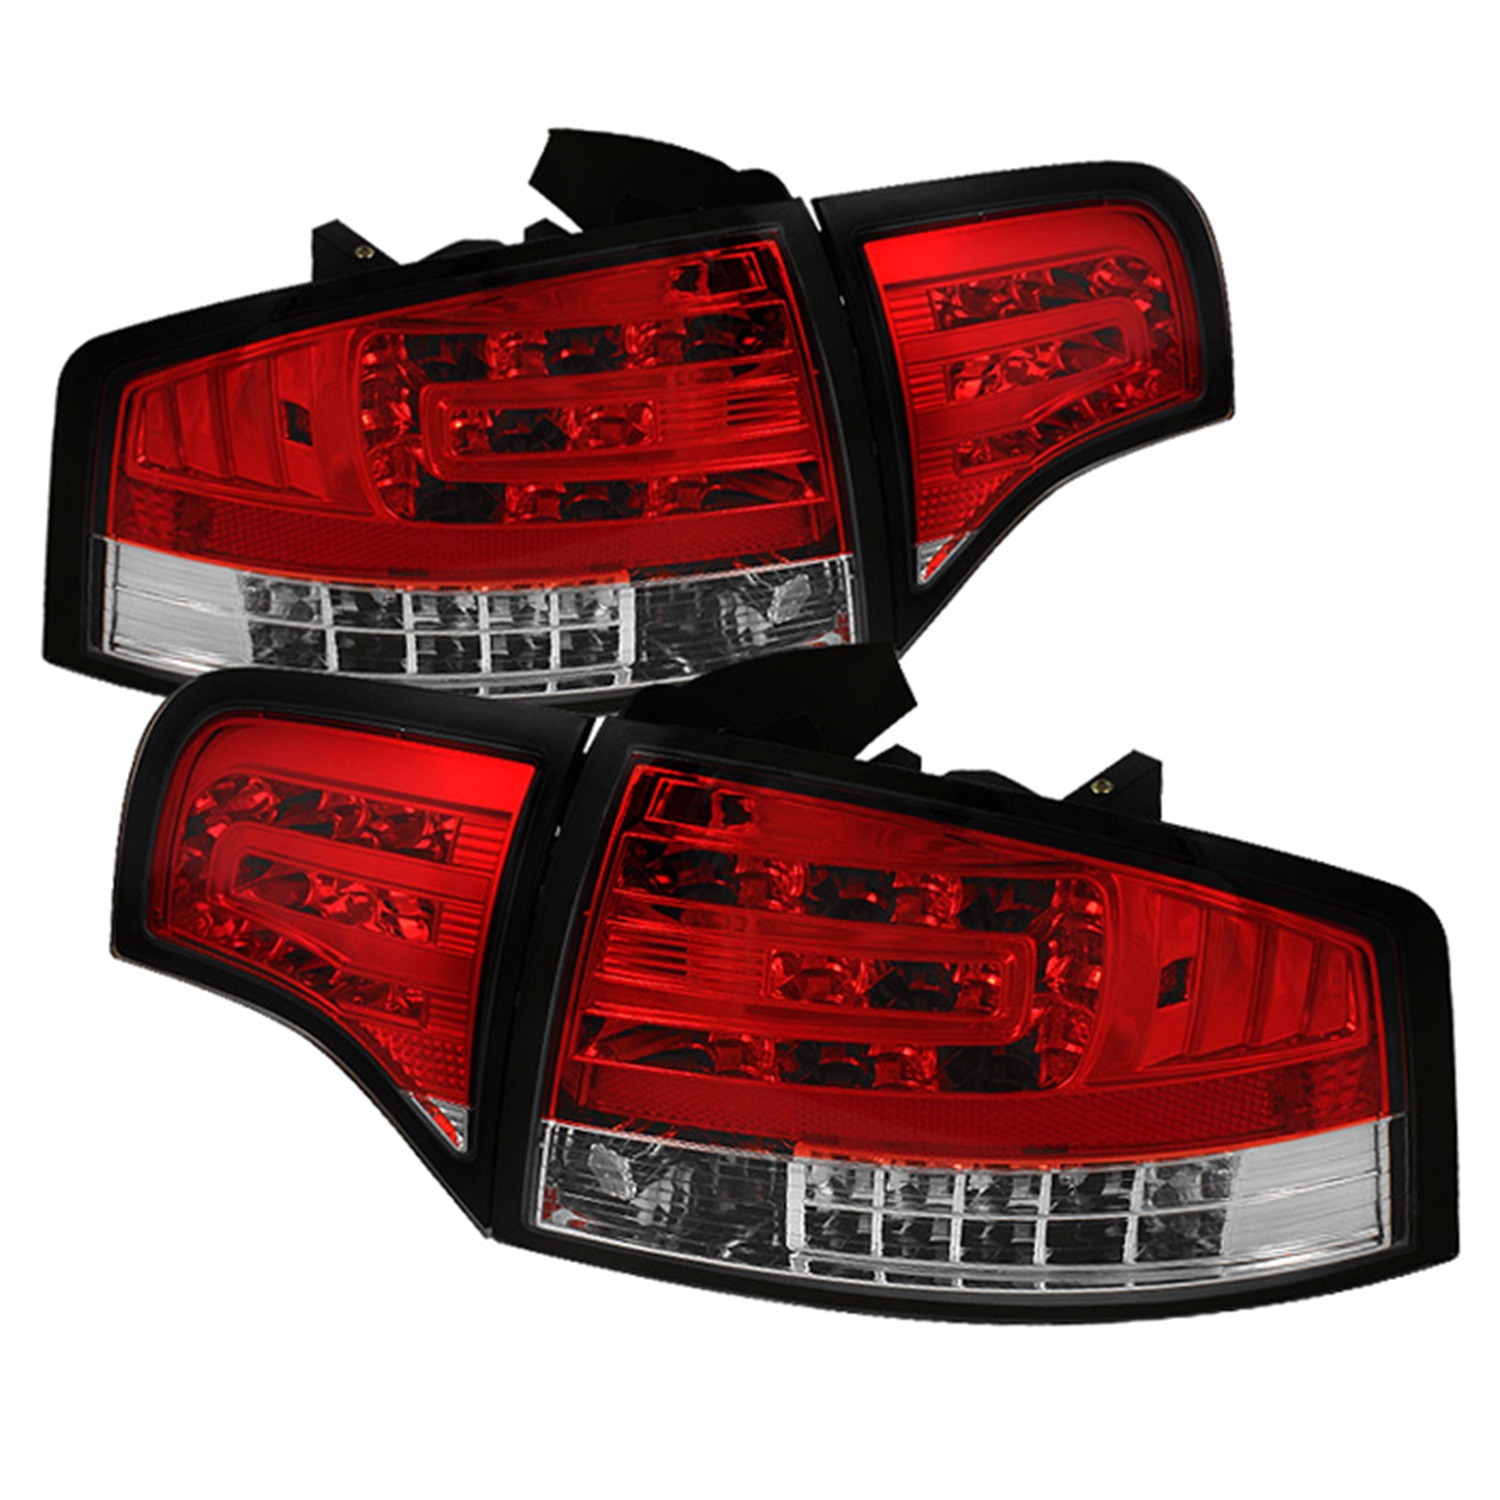 Spyder Auto 5029294 LED Tail Lights Fits 06-08 A4 A4 Quattro